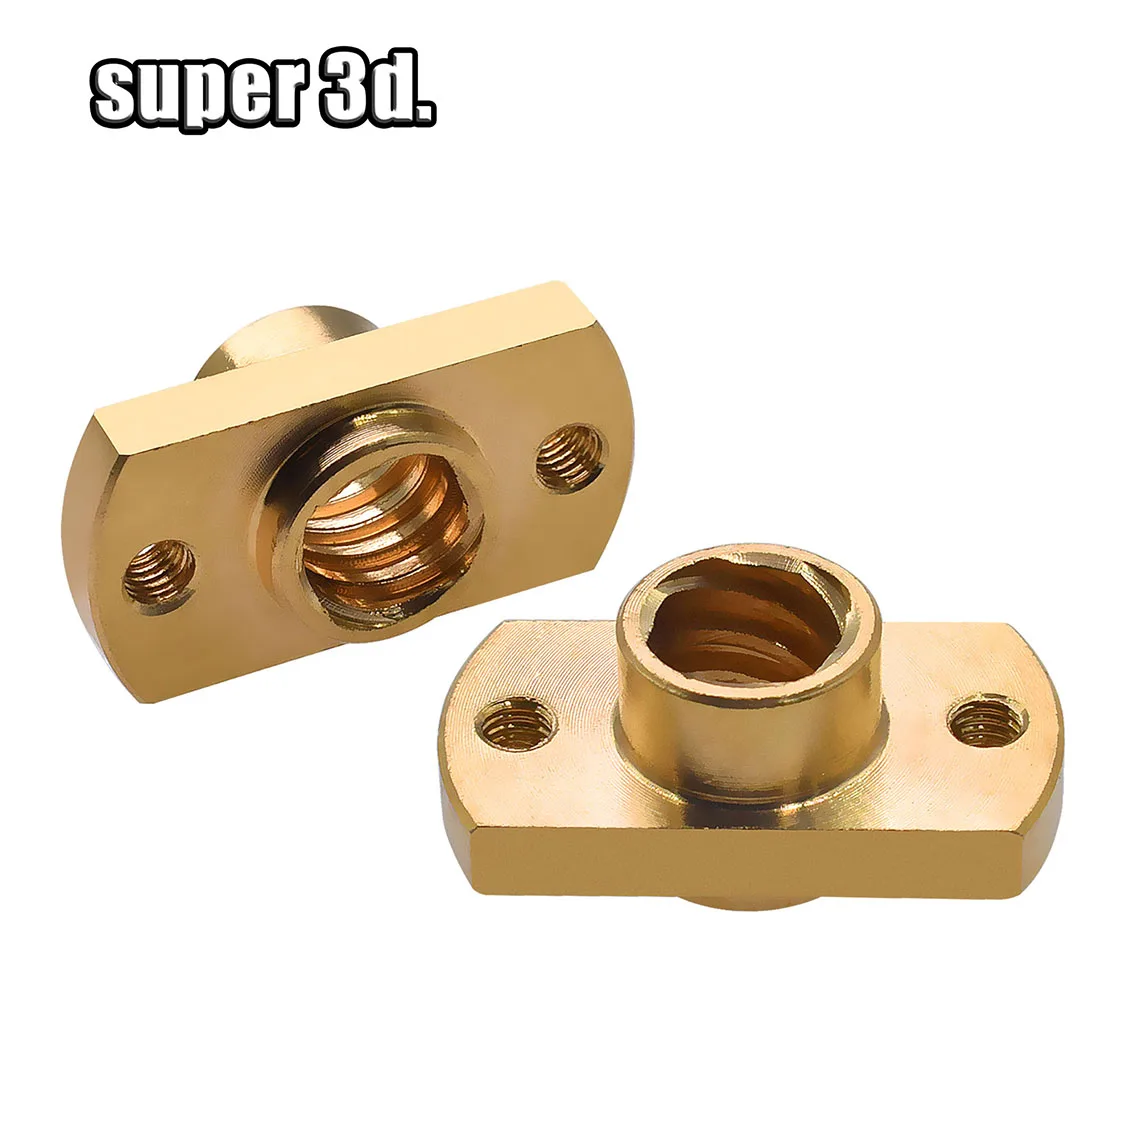 Smoothly T8 Screw Nut Pitch 2mm Screw Nut 2mm 8mm 3D Printer T8 Brass Screw Nut Screw Nut for CNC Parts Size : Lead 8mm Size : 8mm Ideal 